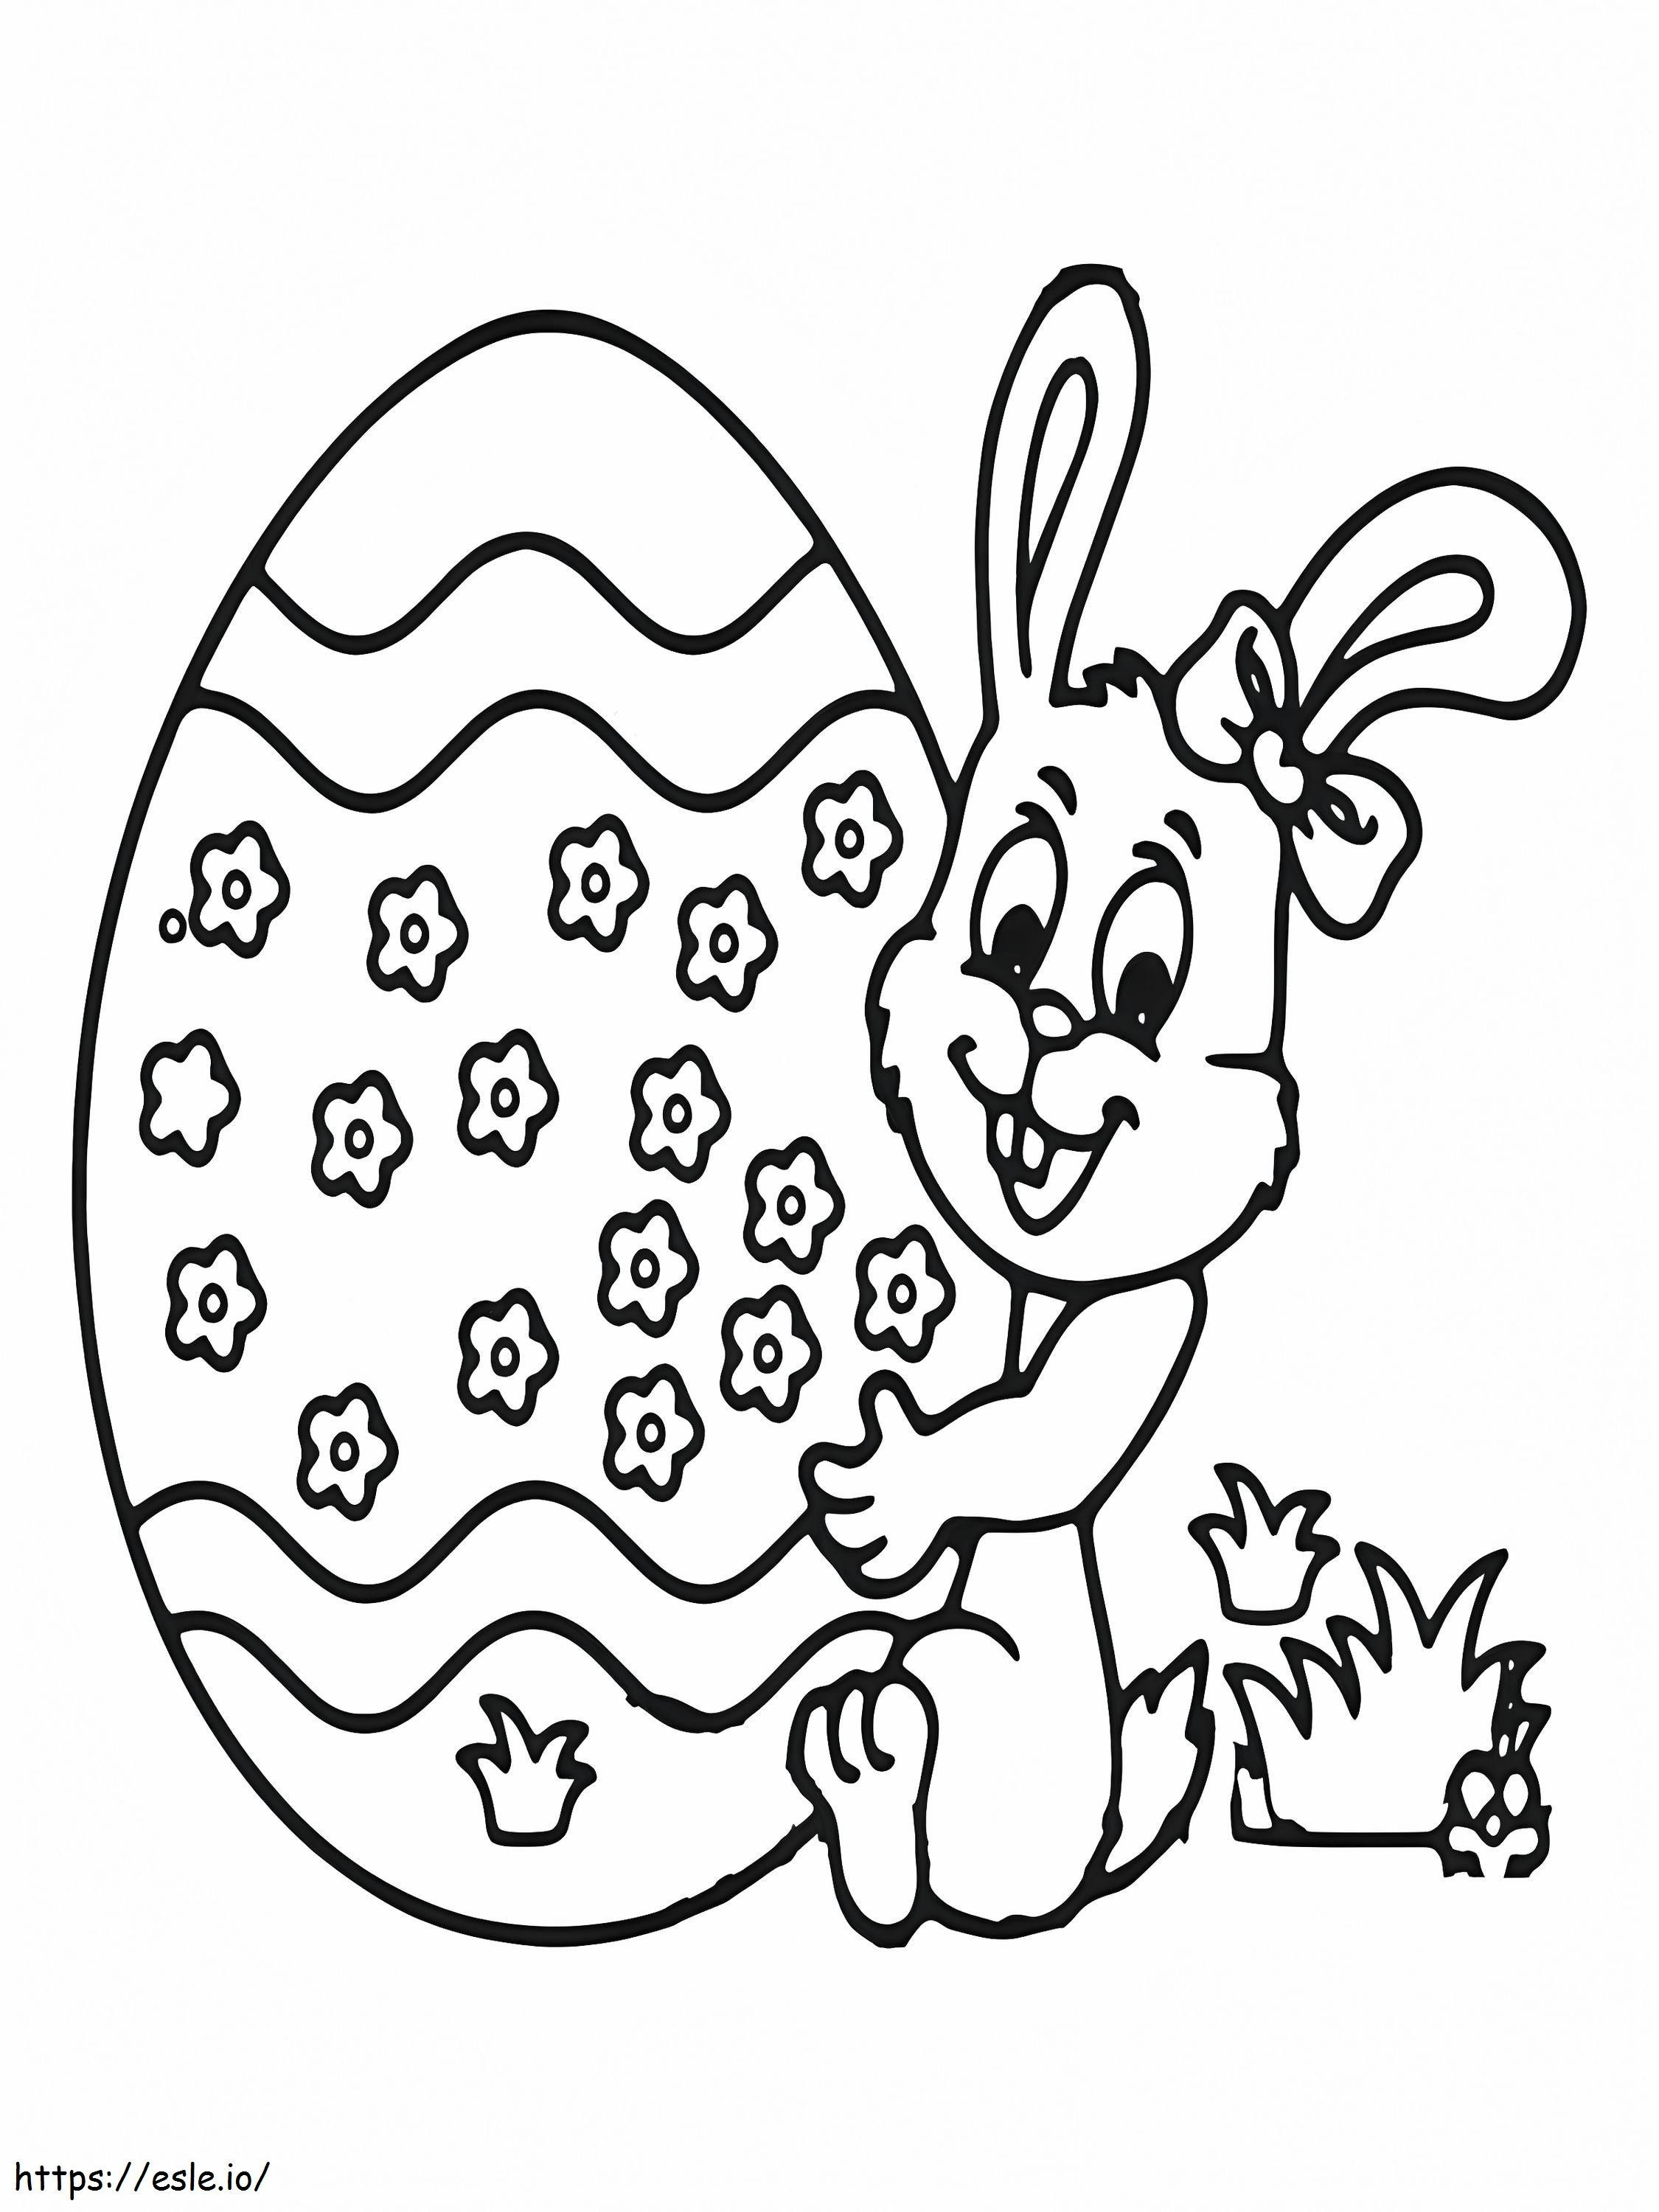 Easter Bunny And Huge Egg 2 coloring page